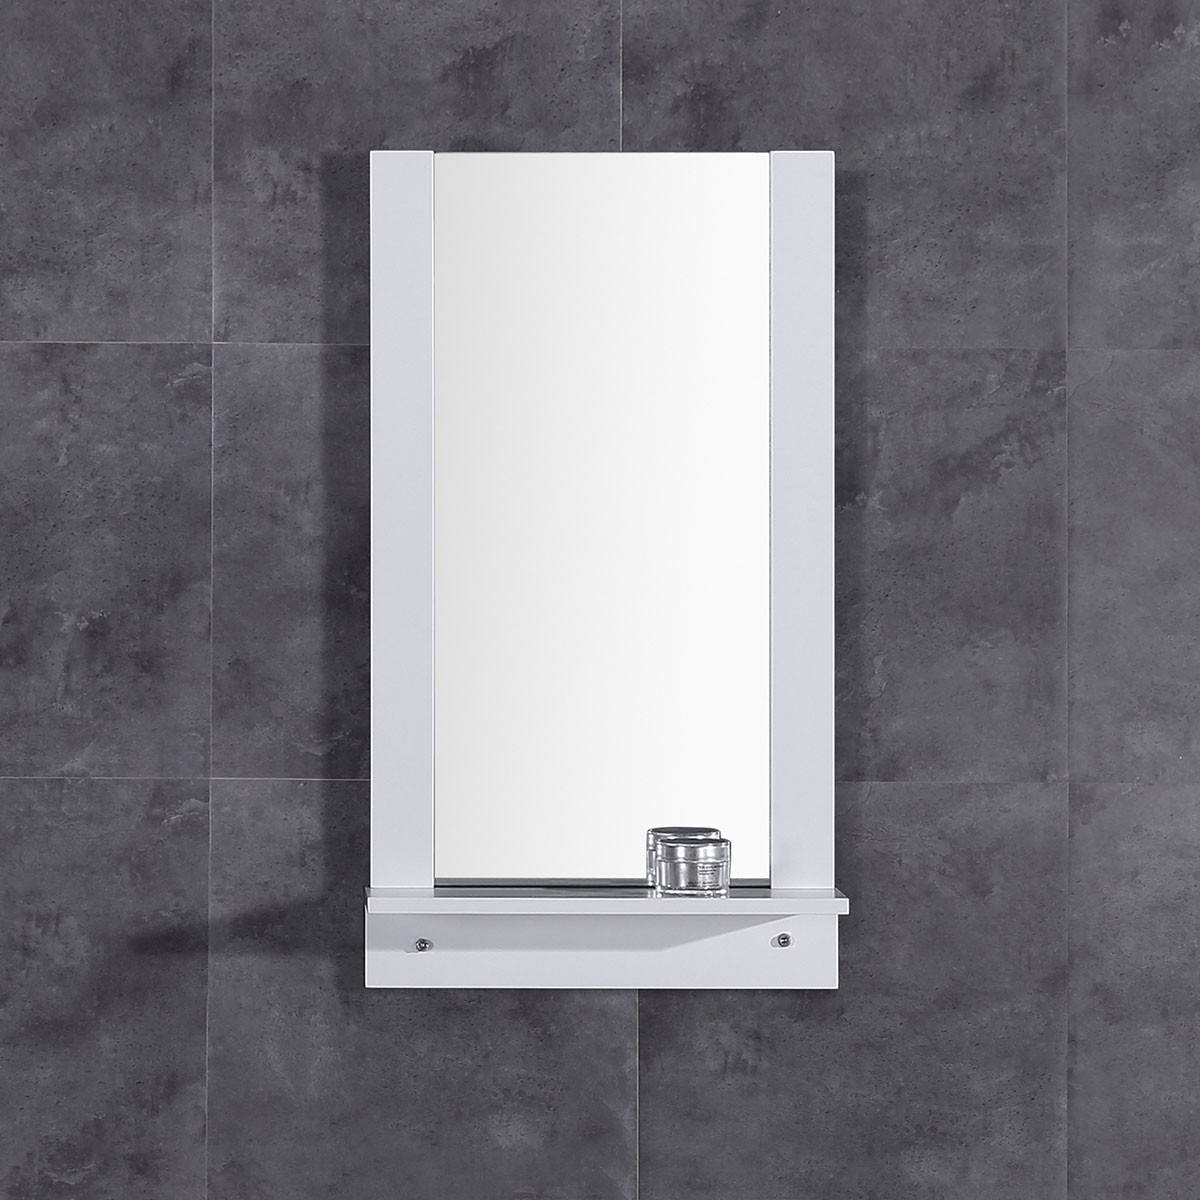 18 x 28 In. Mirror with  Frame (DK-TH21602-M)